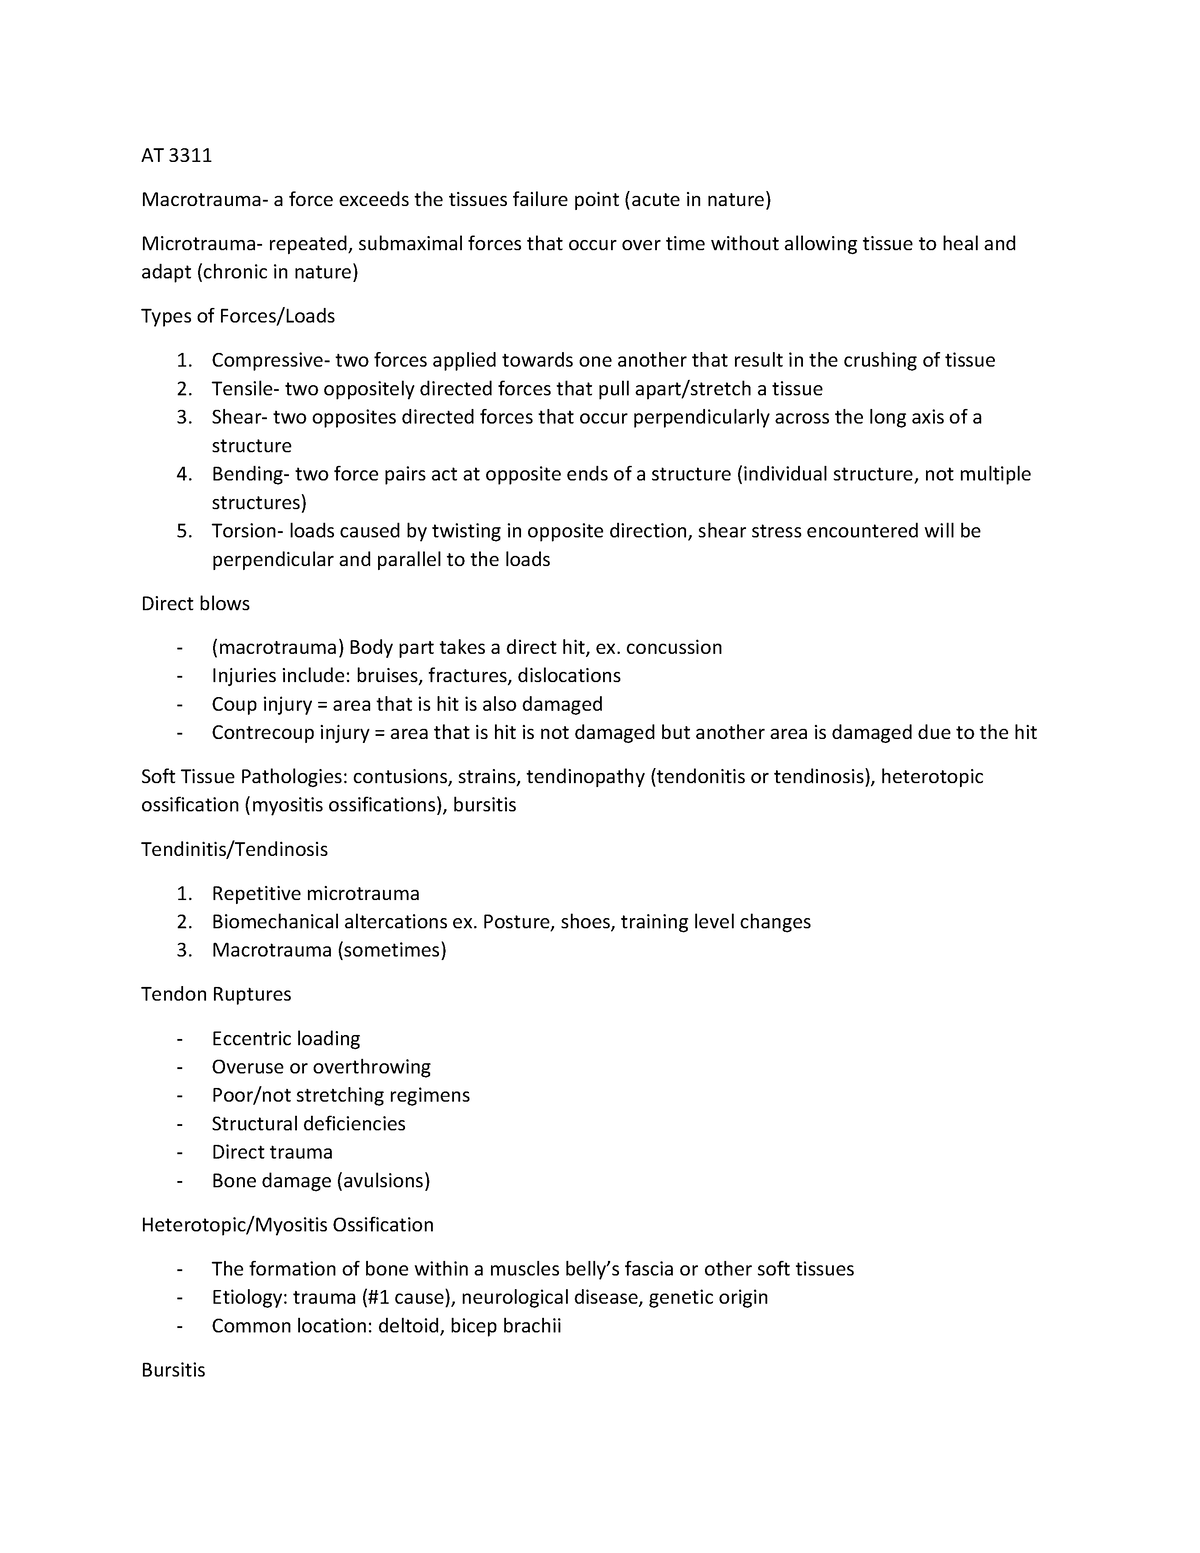 Clinical assement notes - AT 3311 Macrotrauma- a force exceeds the ...